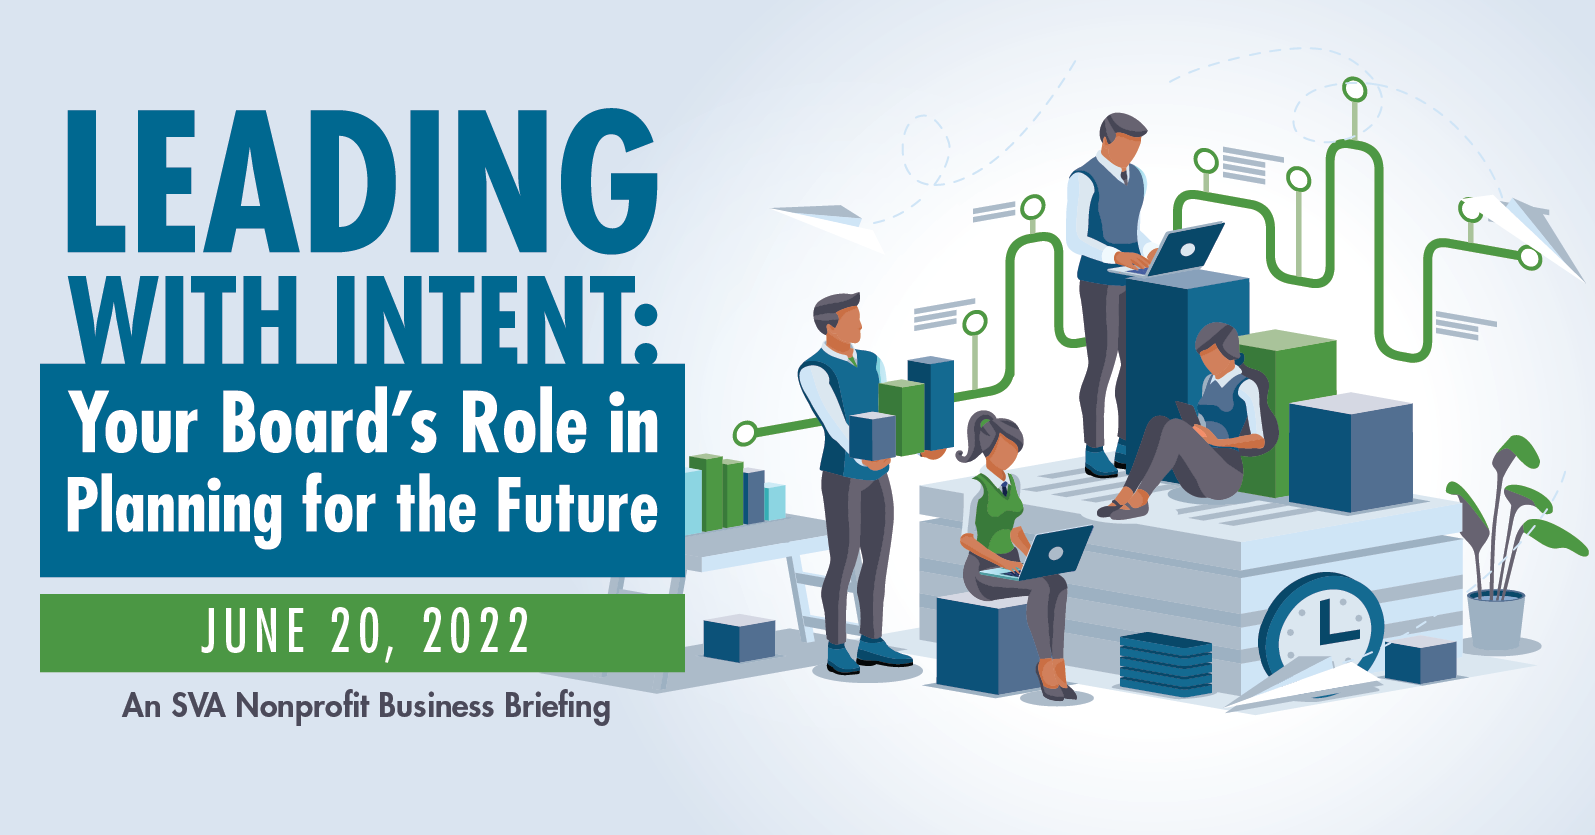 SVA Nonprofit Business Briefing: Leading With Intent: Your Board’s Role in Planning for the Future